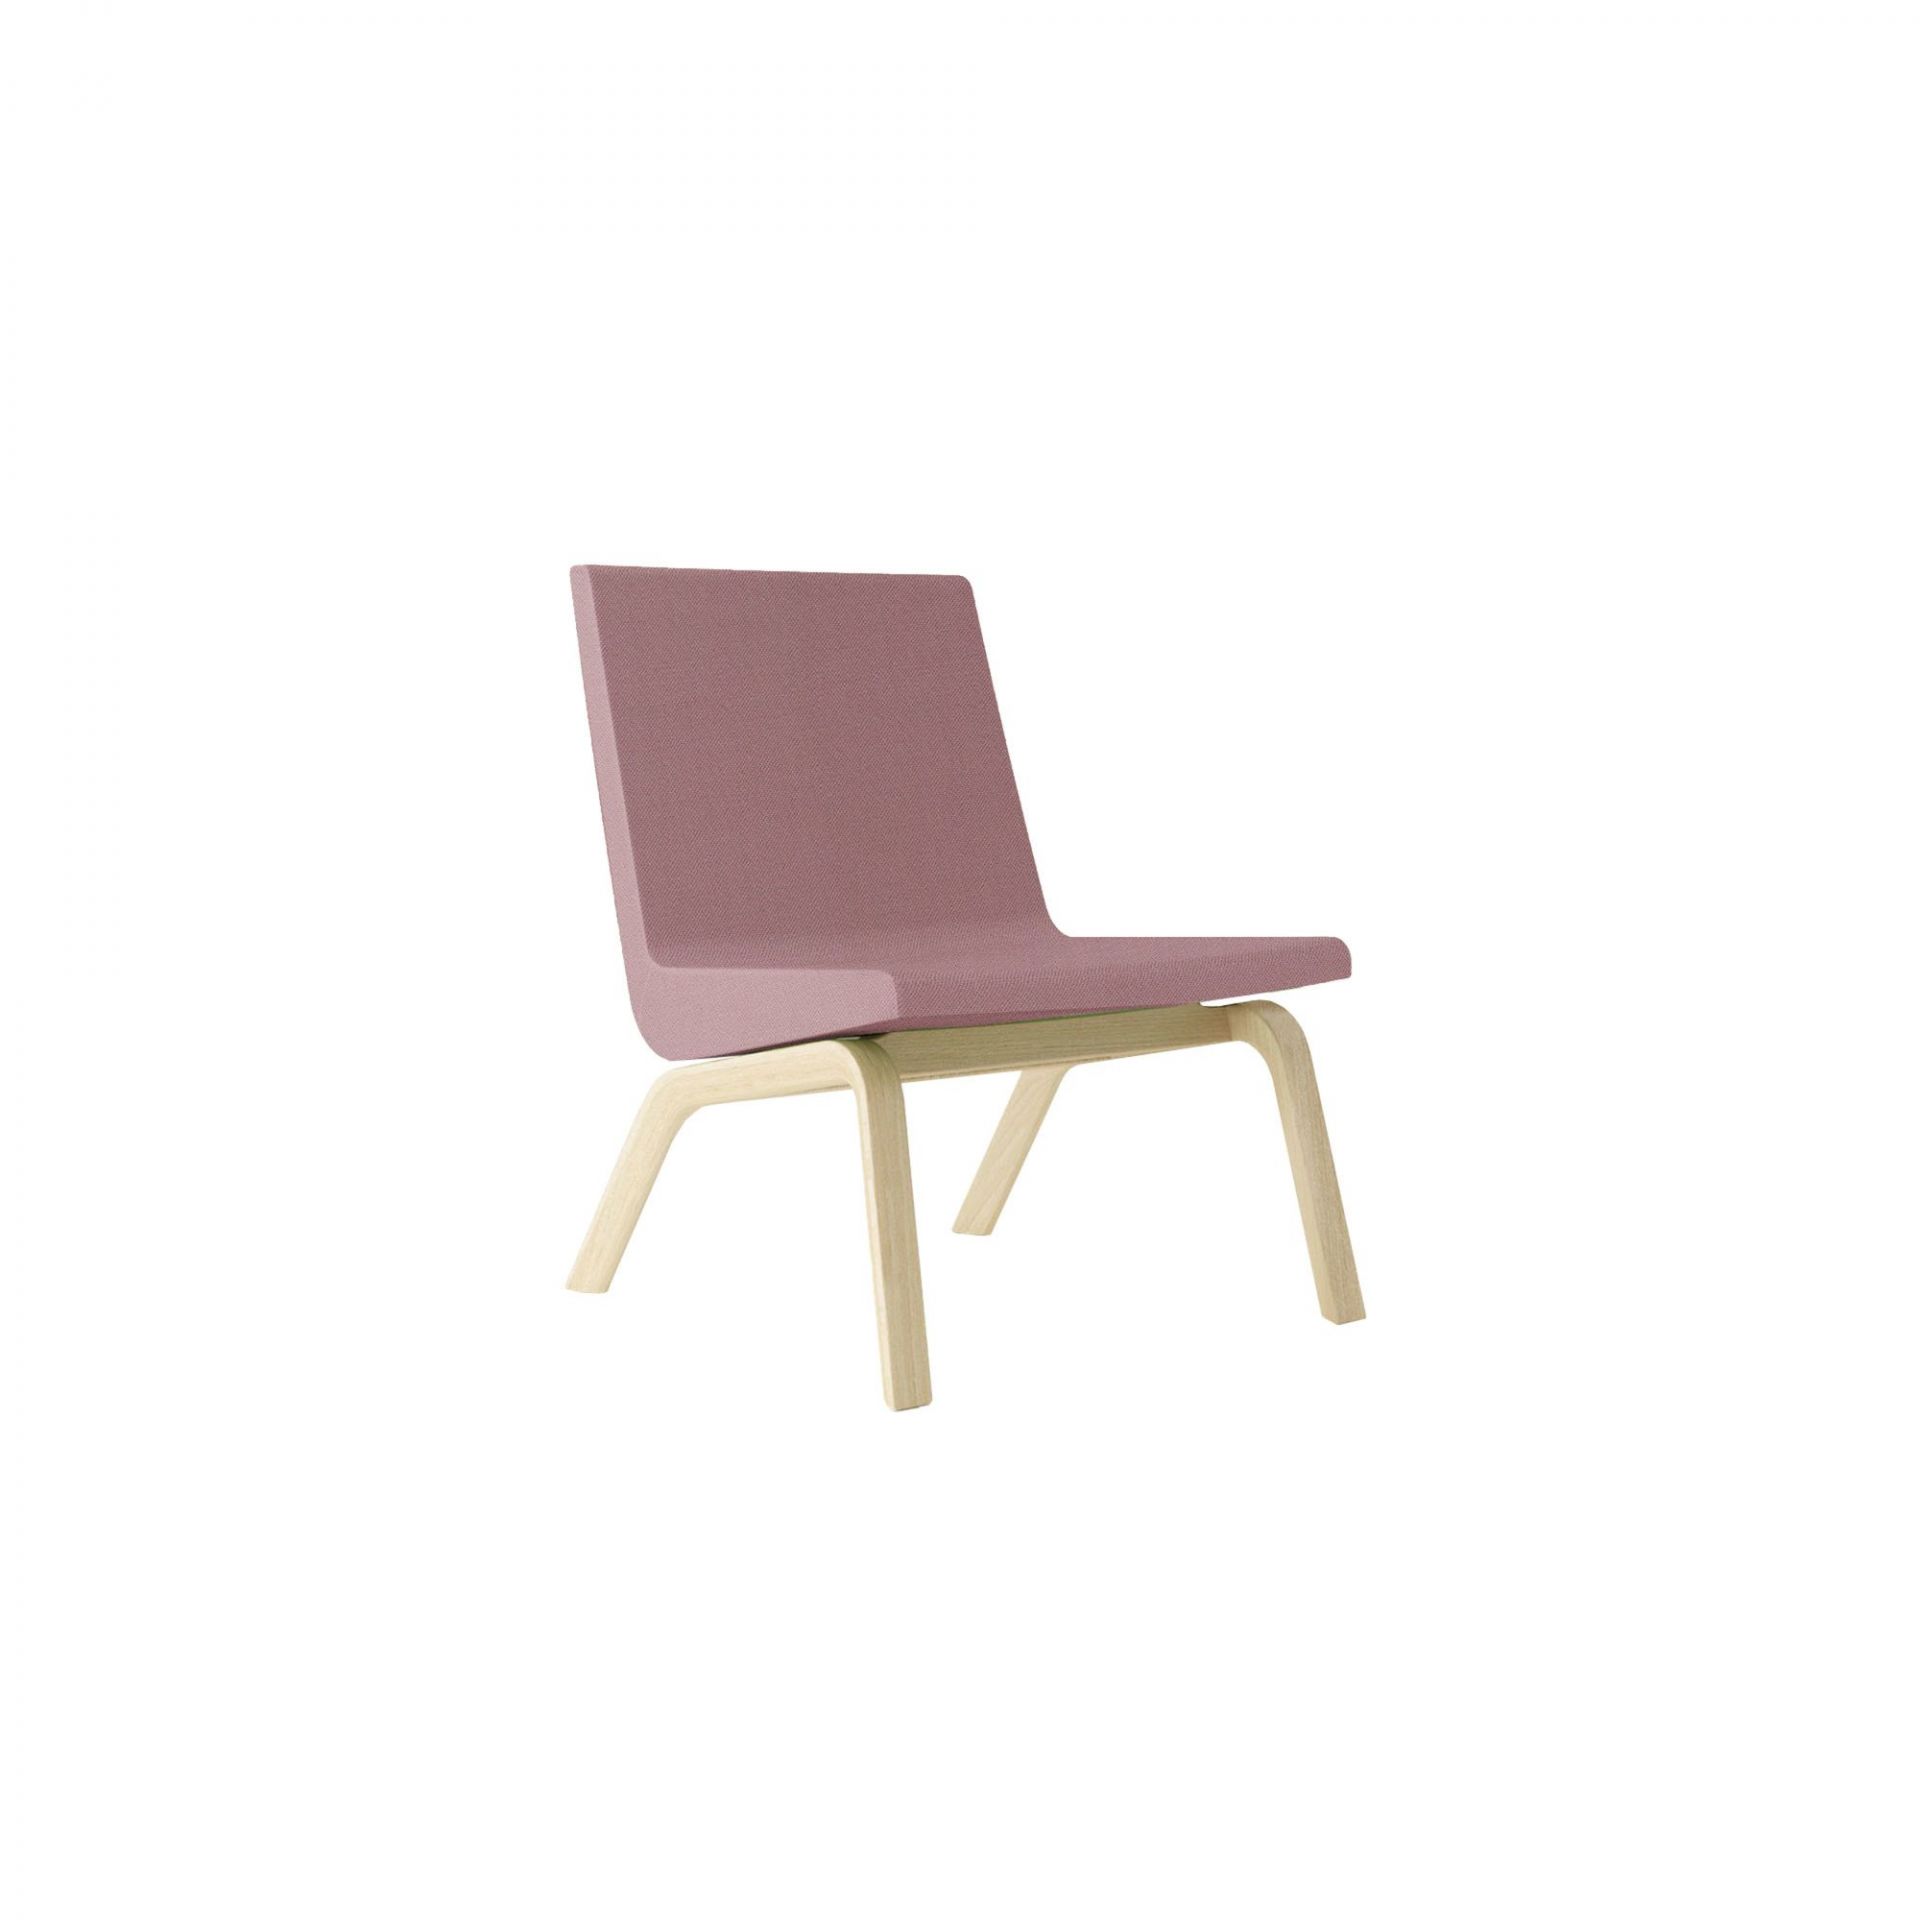 Woods Lounge chair with wooden legs product image 1